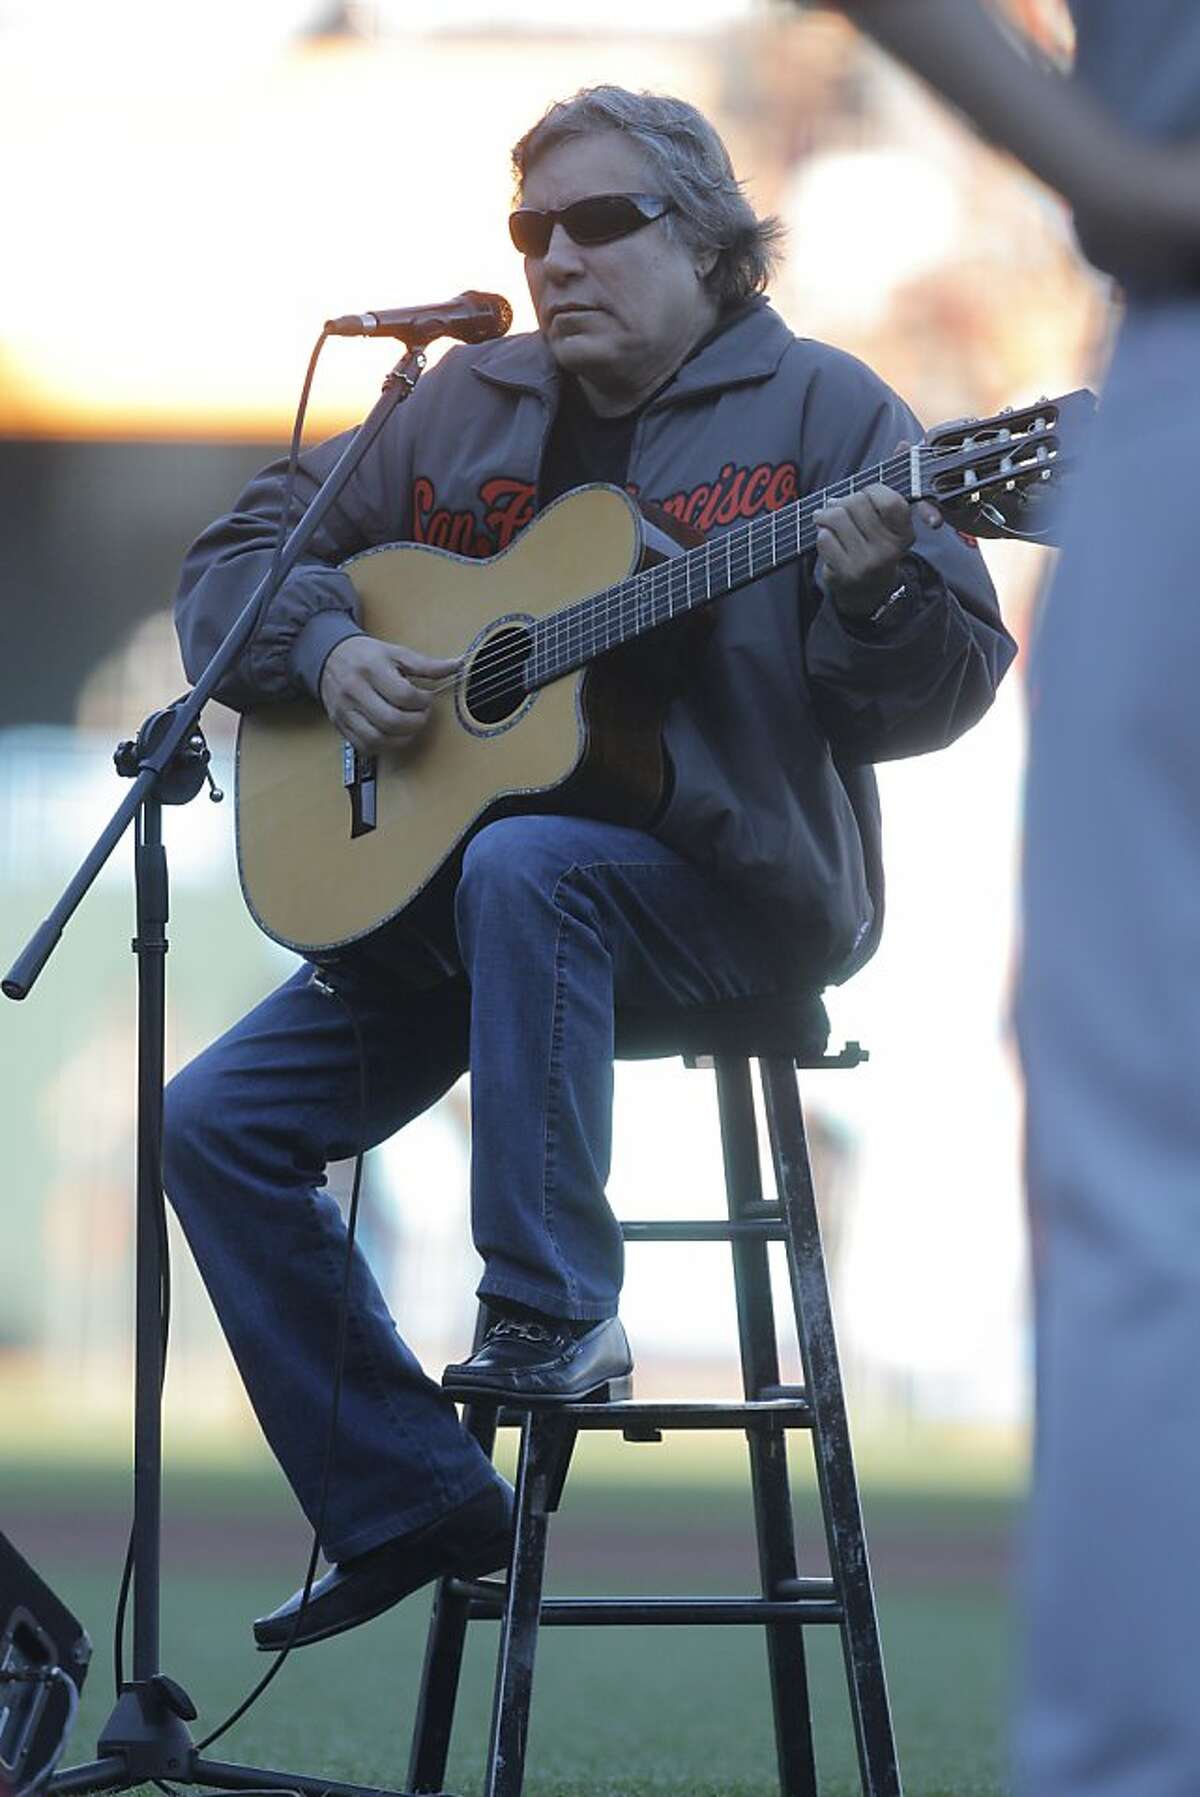 Jose Feliciano sings the National Anthem prior to game 1 of the NLCS at AT&T Park on Sunday, Oct. 14, 2012 in San Francisco, Calif.